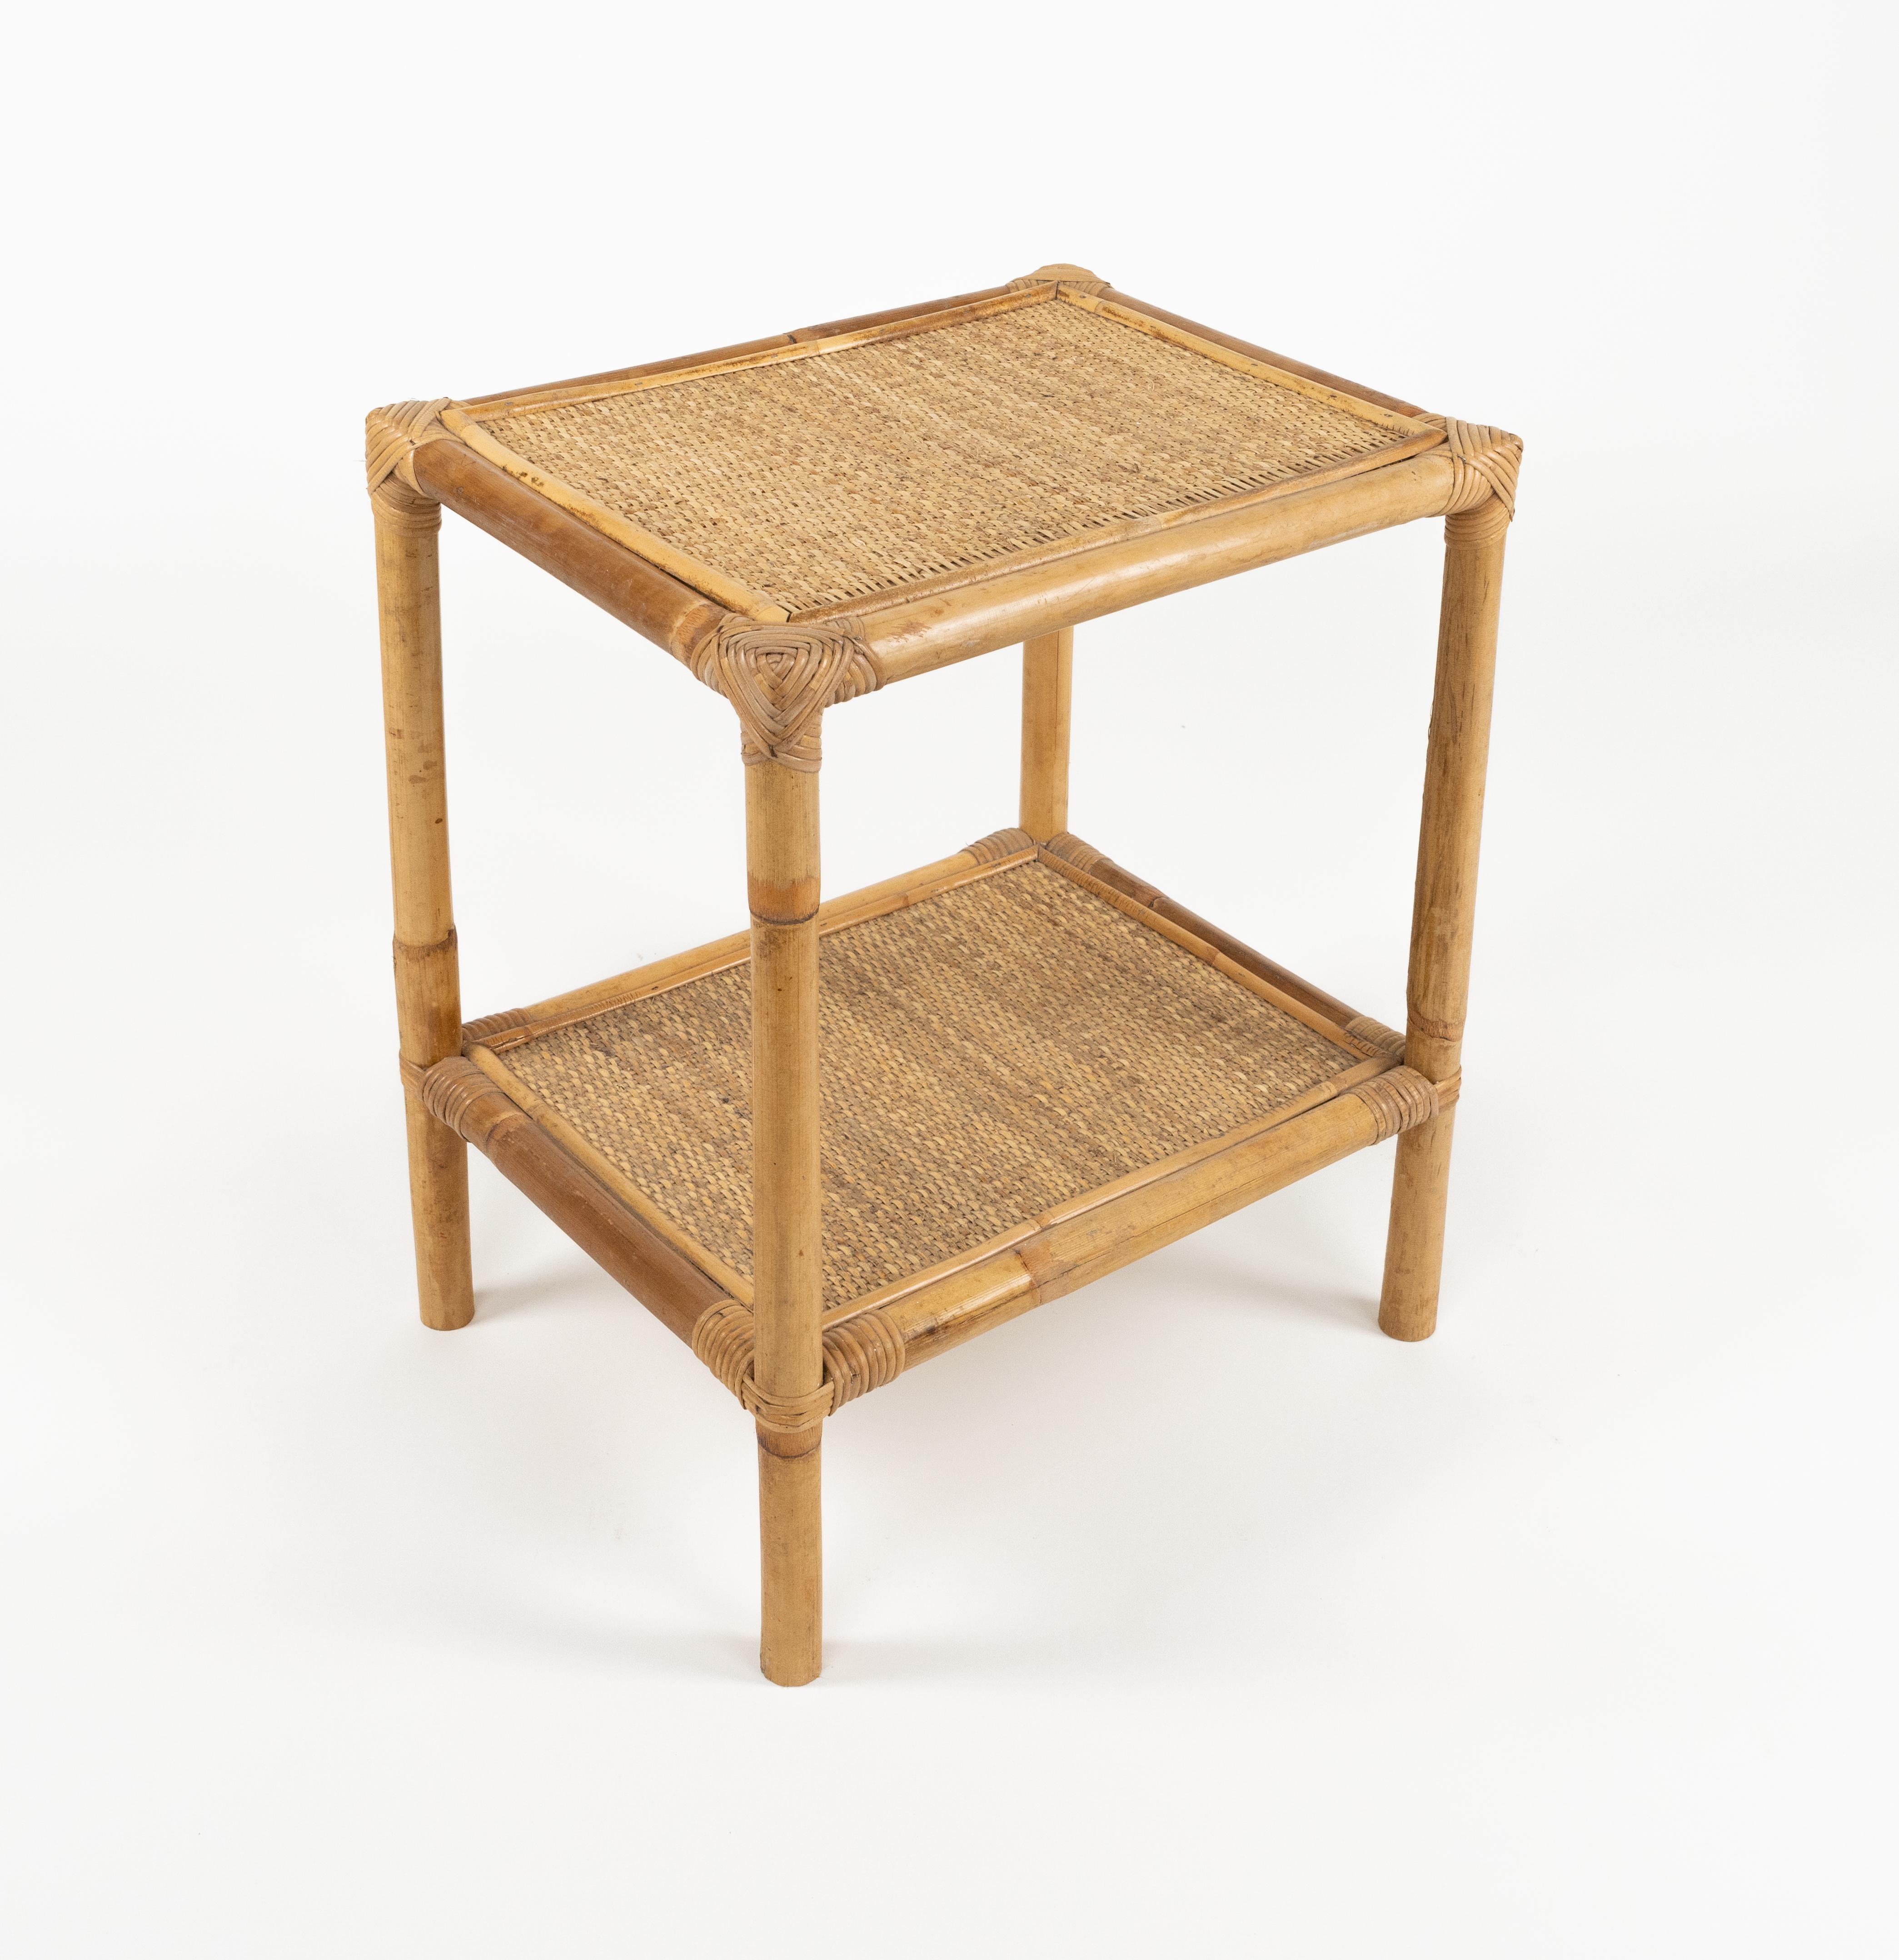 Midcentury Pair of Bed Side Tables in Bamboo, Rattan & Wicker, Italy 1970s For Sale 5